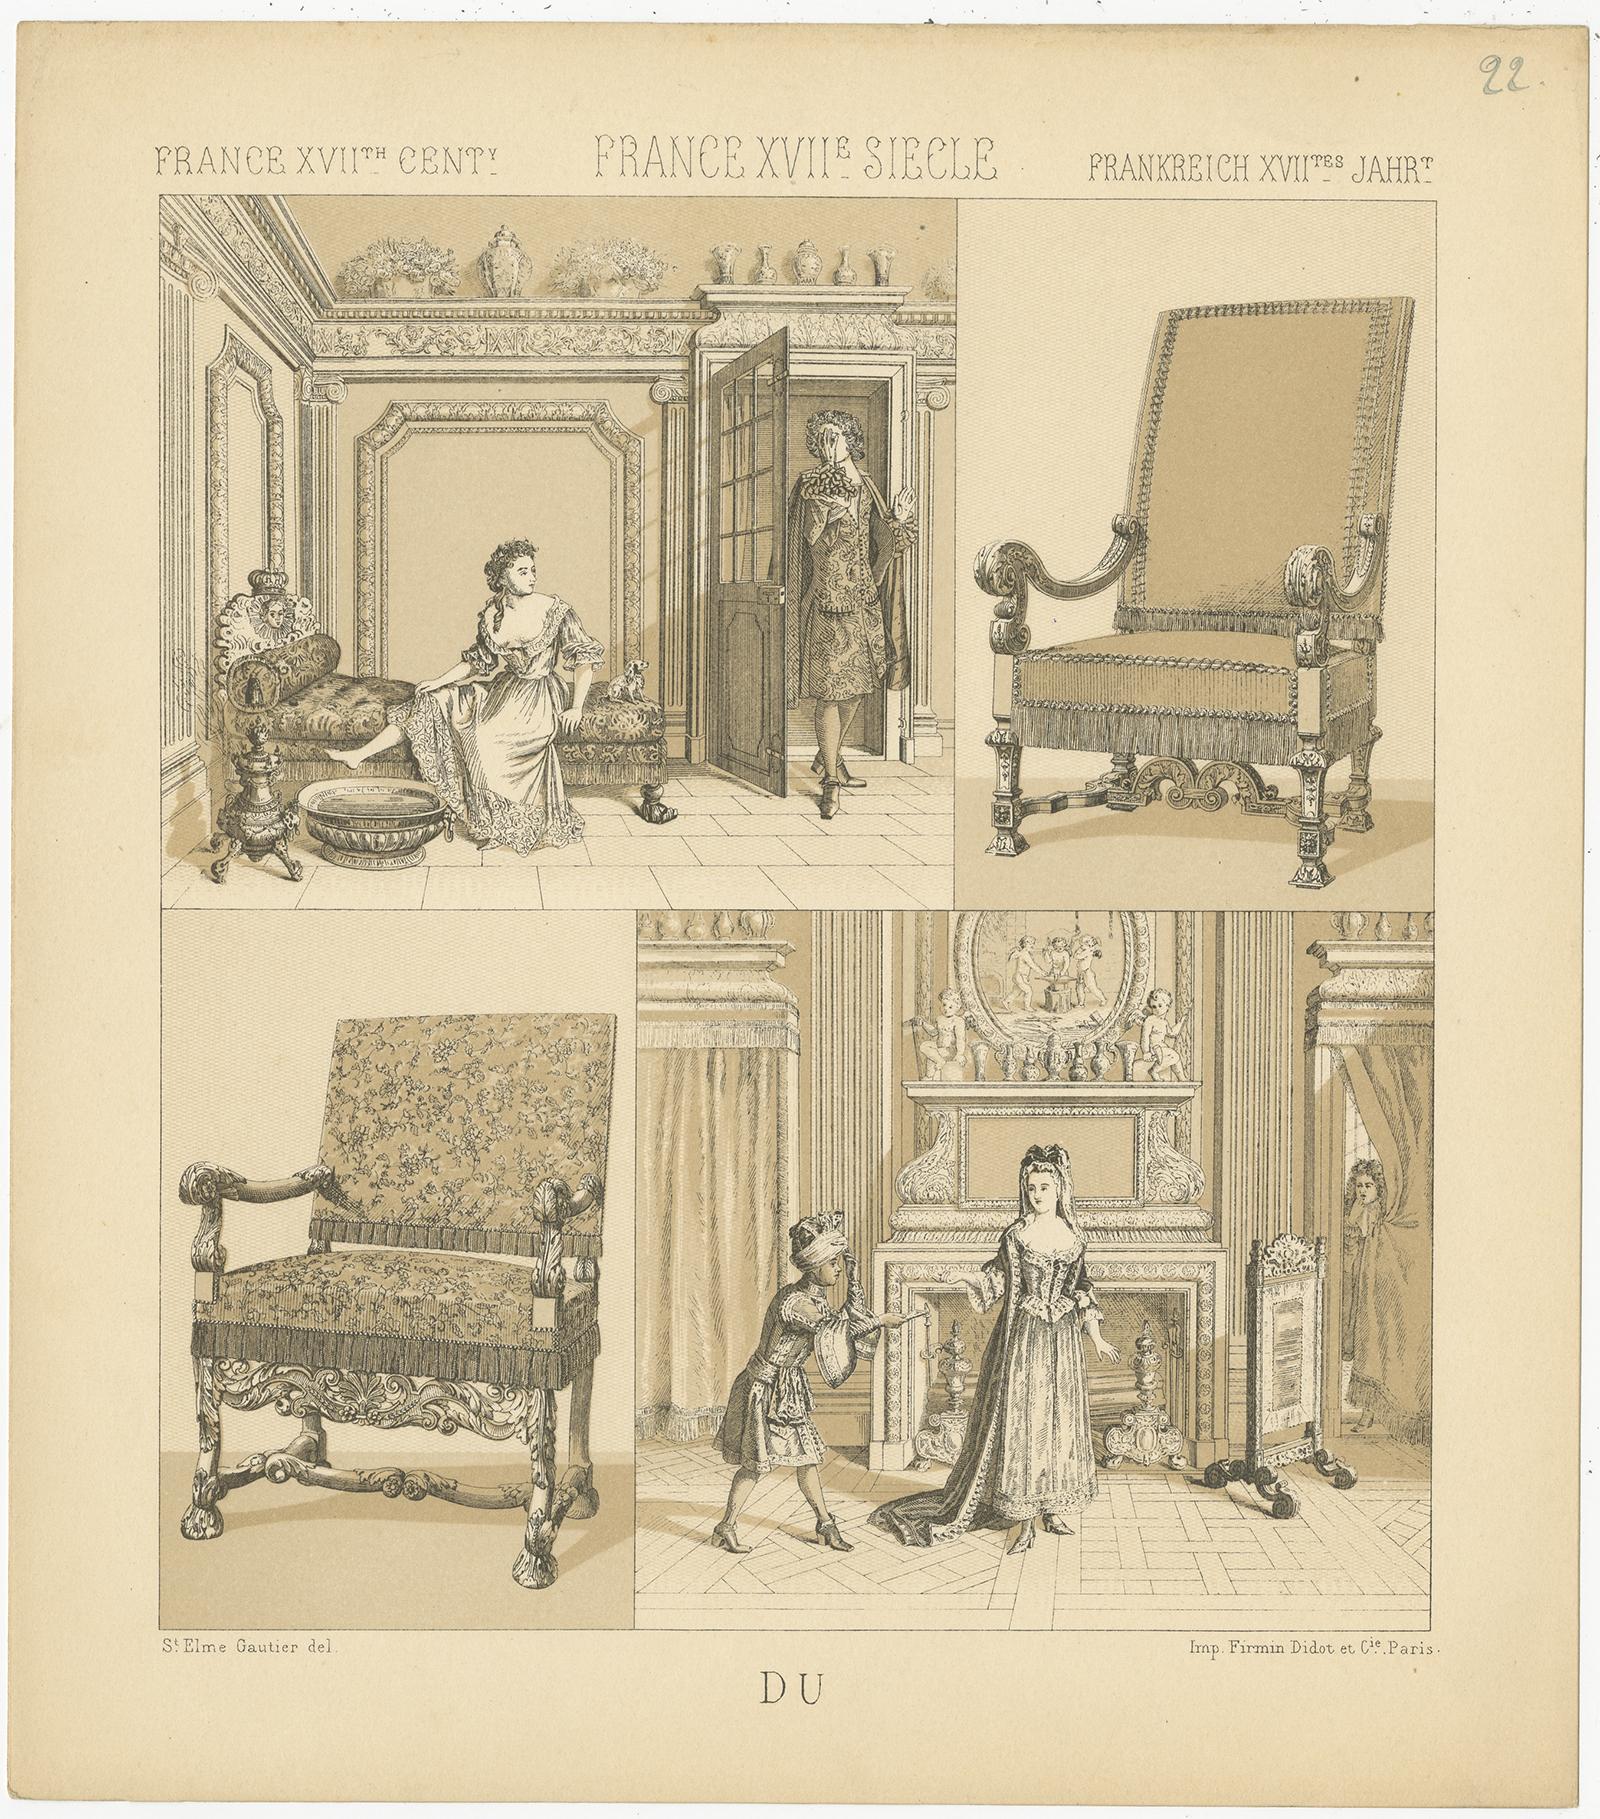 Antique print titled 'France XVIIth Cent - France XVIIe Siecle - Frankreich XVIItes Jahr'. Chromolithograph of French XVIIth Cent Furniture. This print originates from 'Le Costume Historique' by M.A. Racinet. Published, circa 1880.